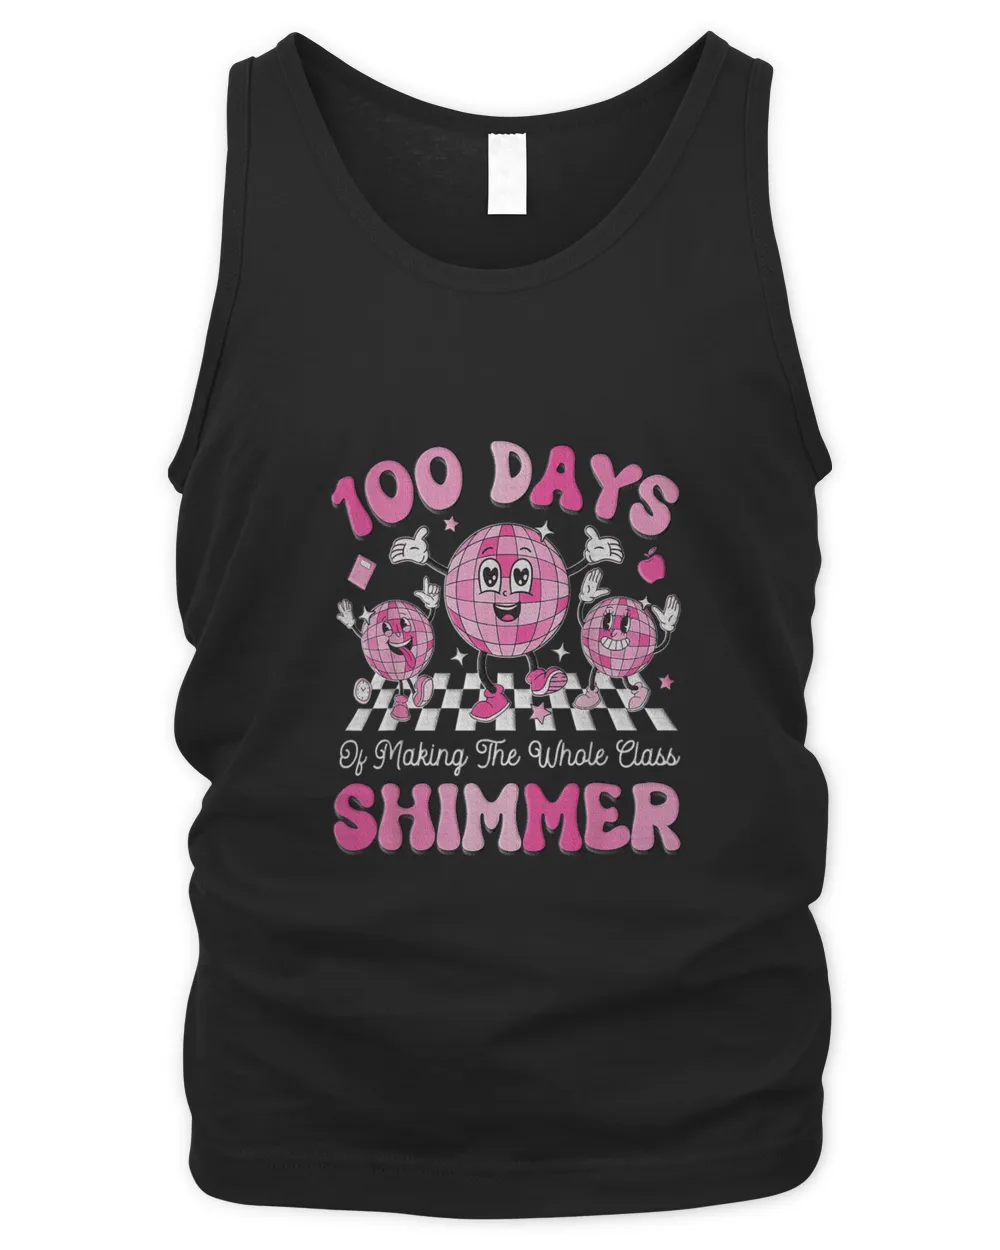 100 Days Of Making The Whole Class Shimmer 100Th Day  S